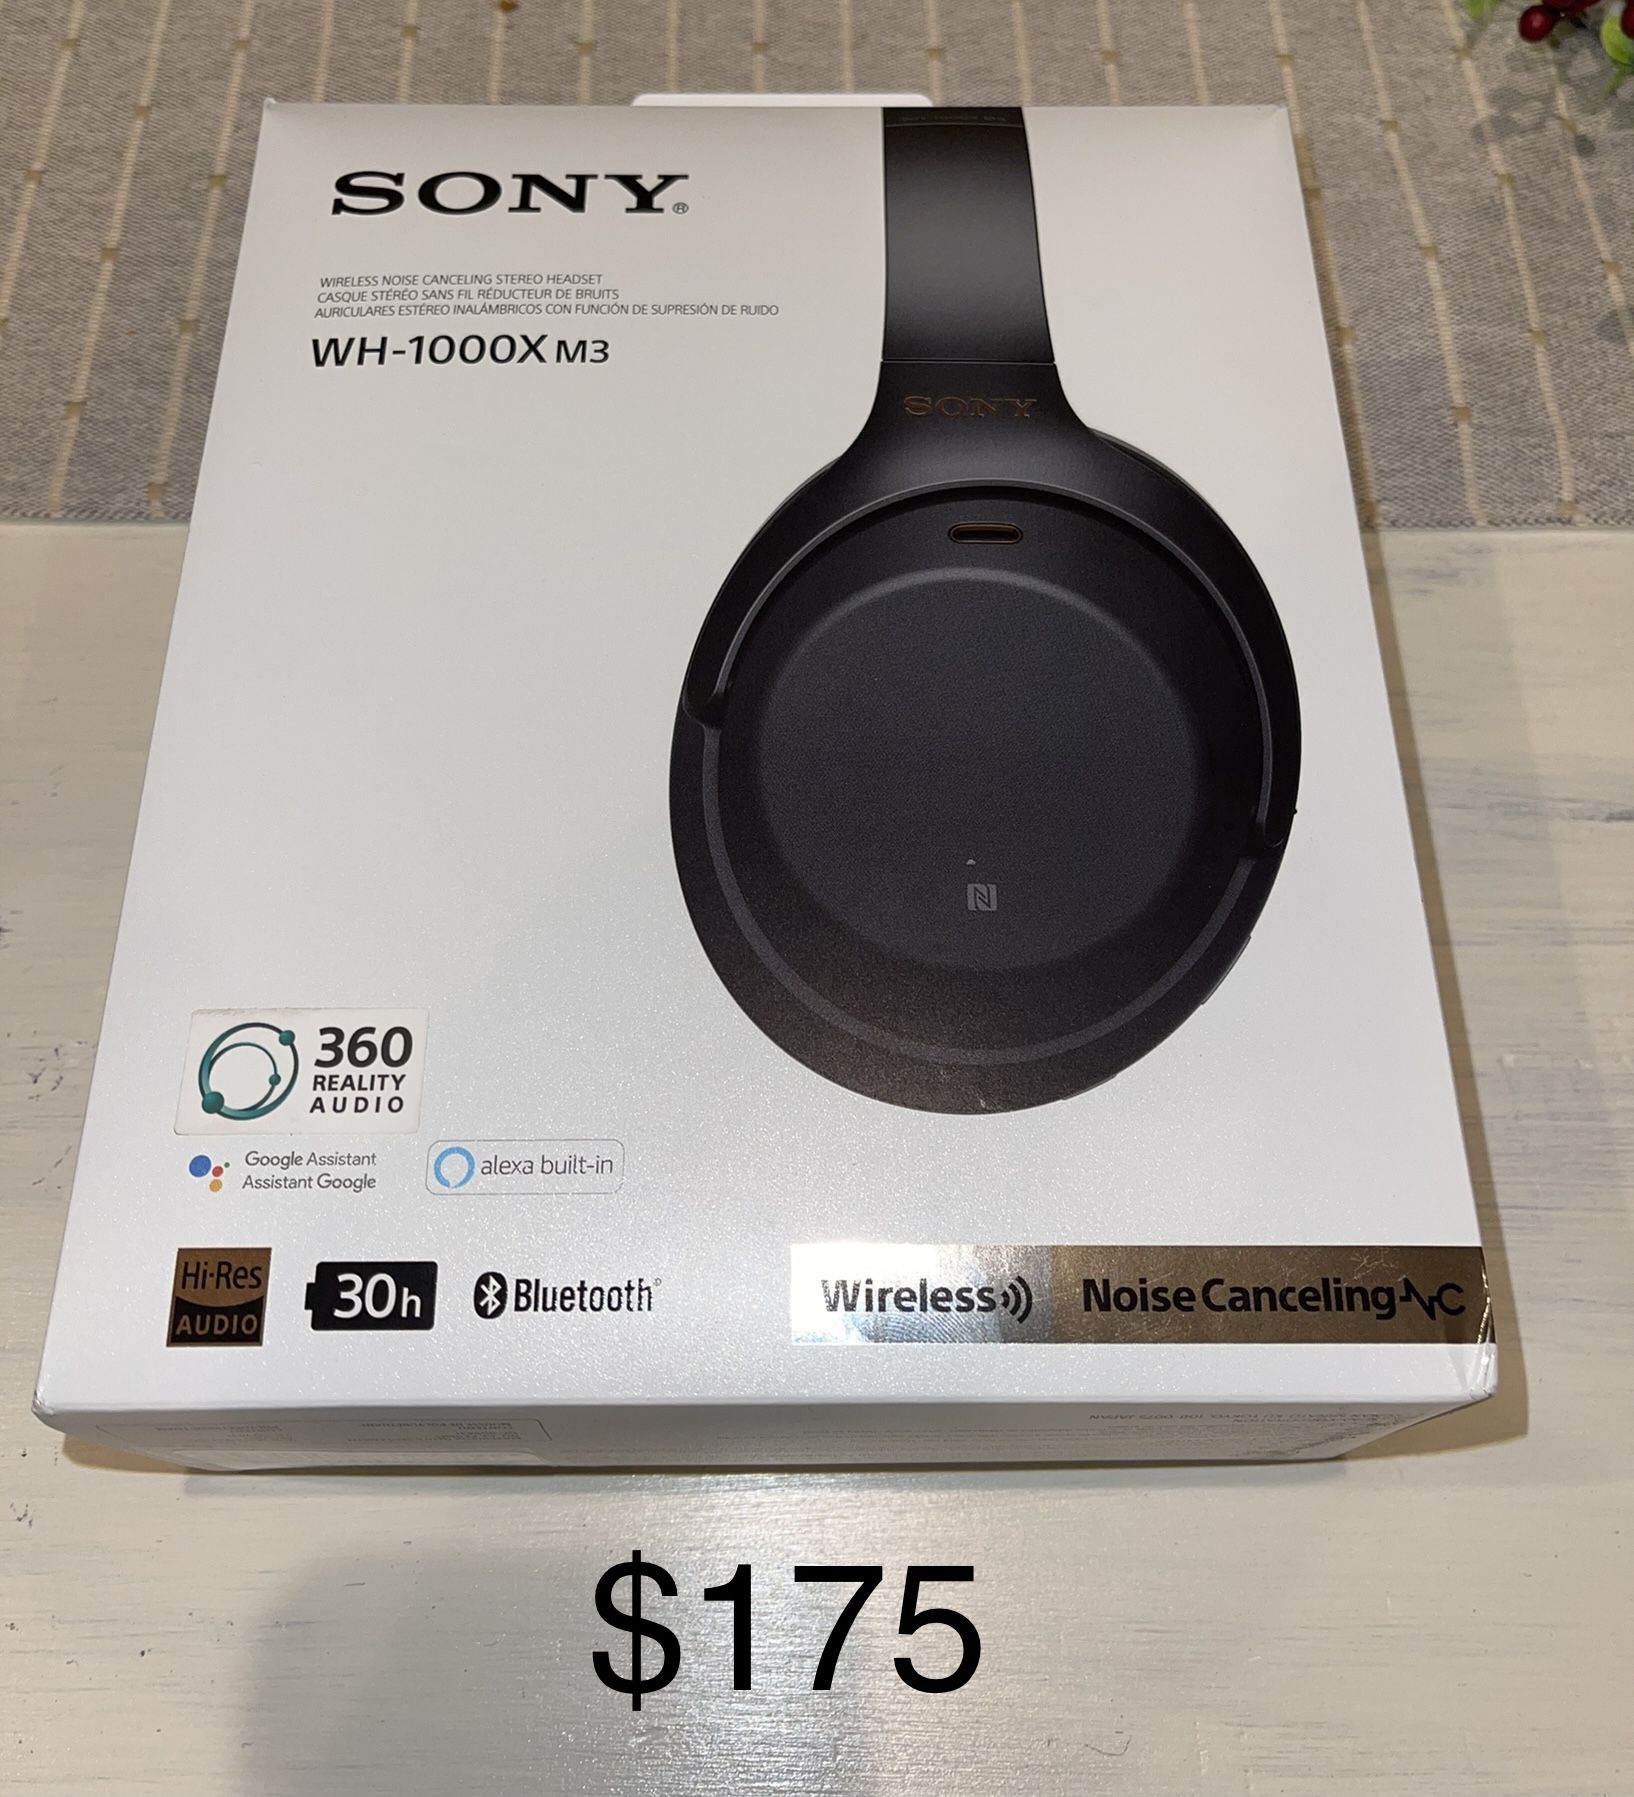 Sony WH-1000XM3 Wireless Noise Cancelling Over the Ear Headphones